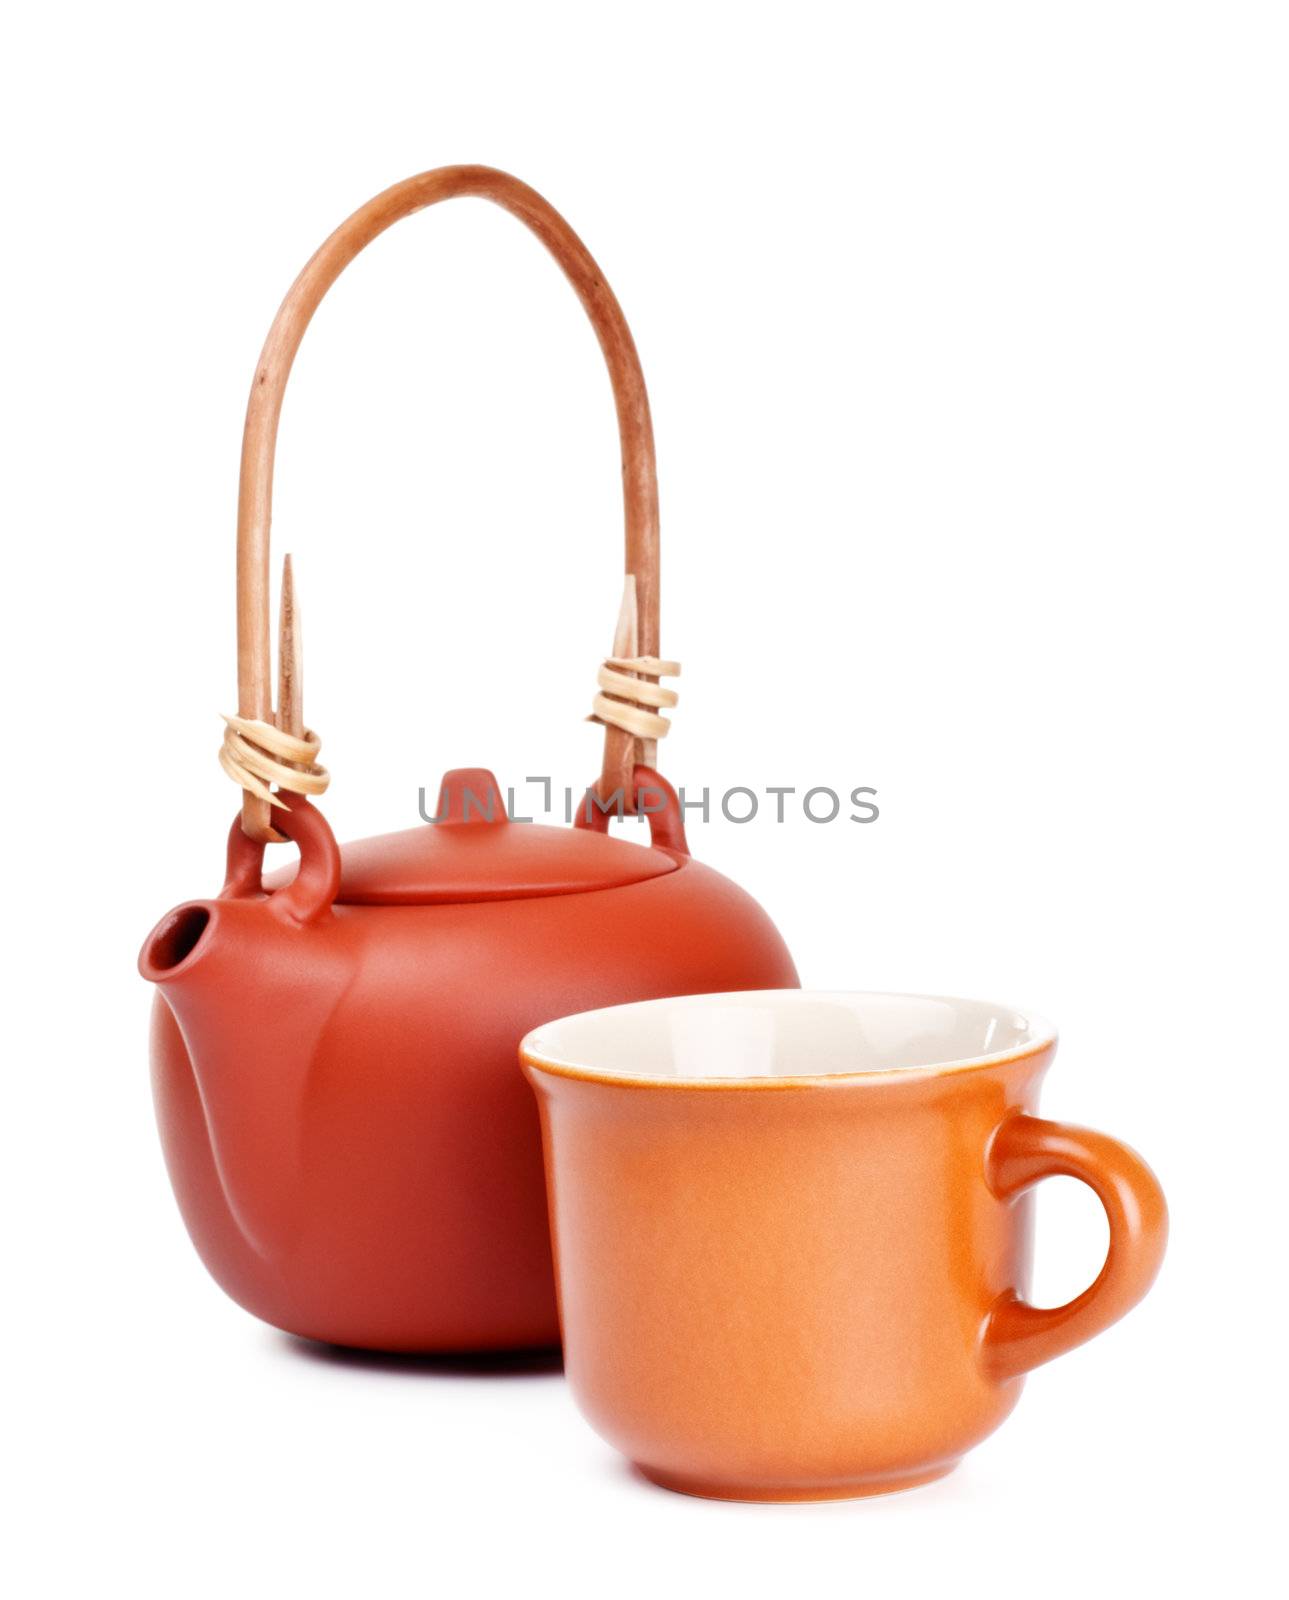 clay kettle and cup isolated on white